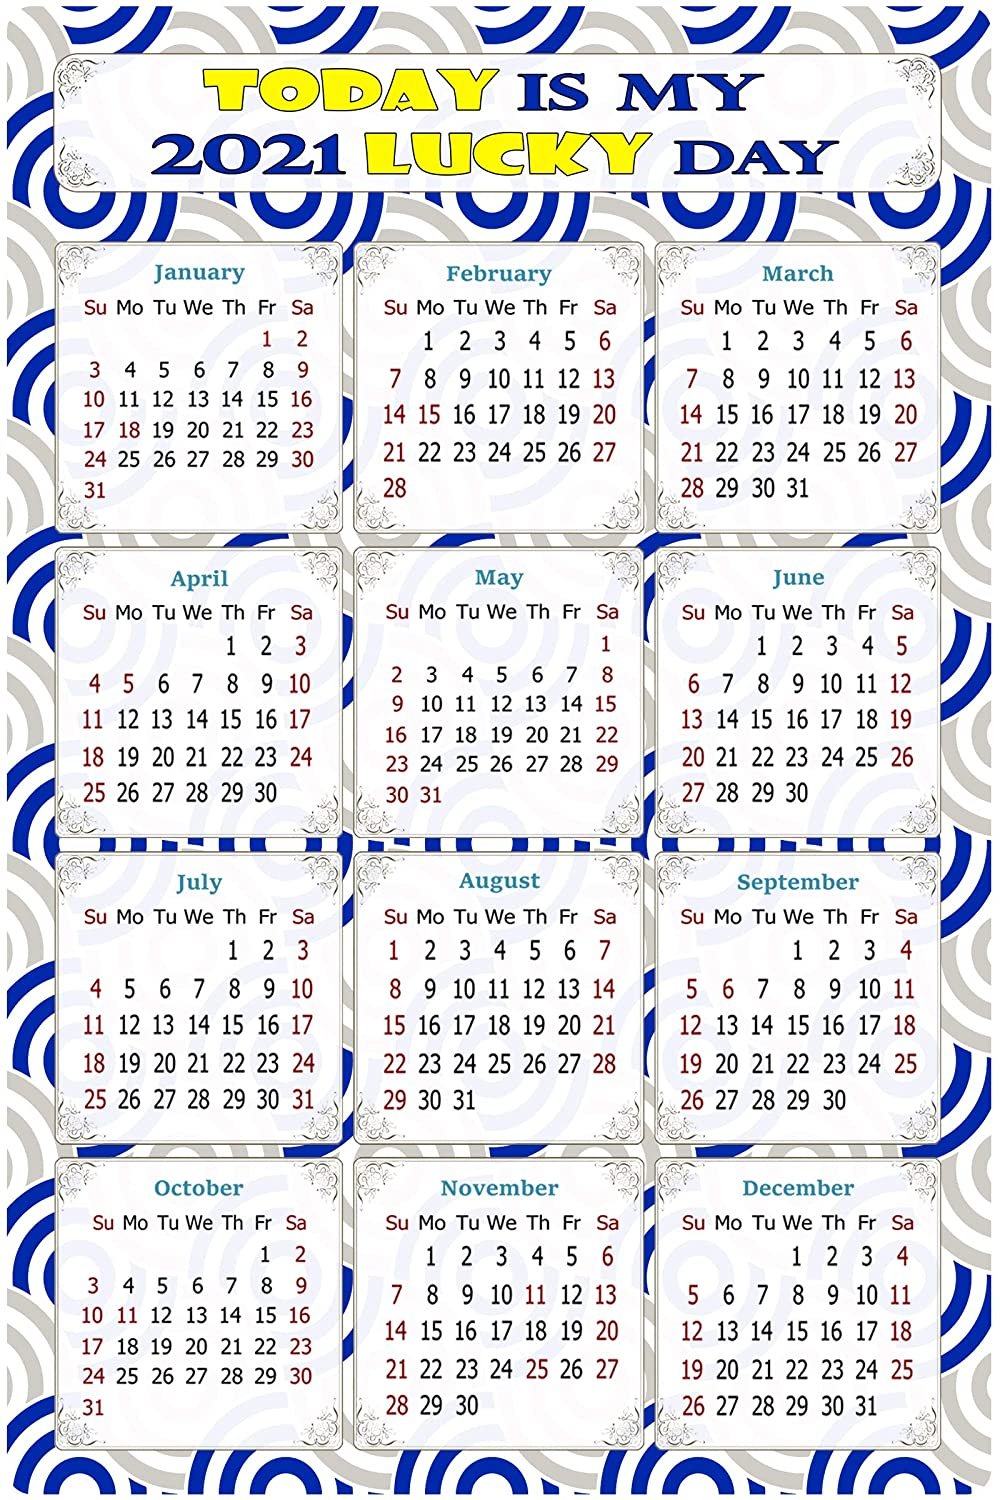 2021 Magnetic Calendar - Calendar Magnets - Today is My Lucky Day - Themed 08 (5.25 x 8)